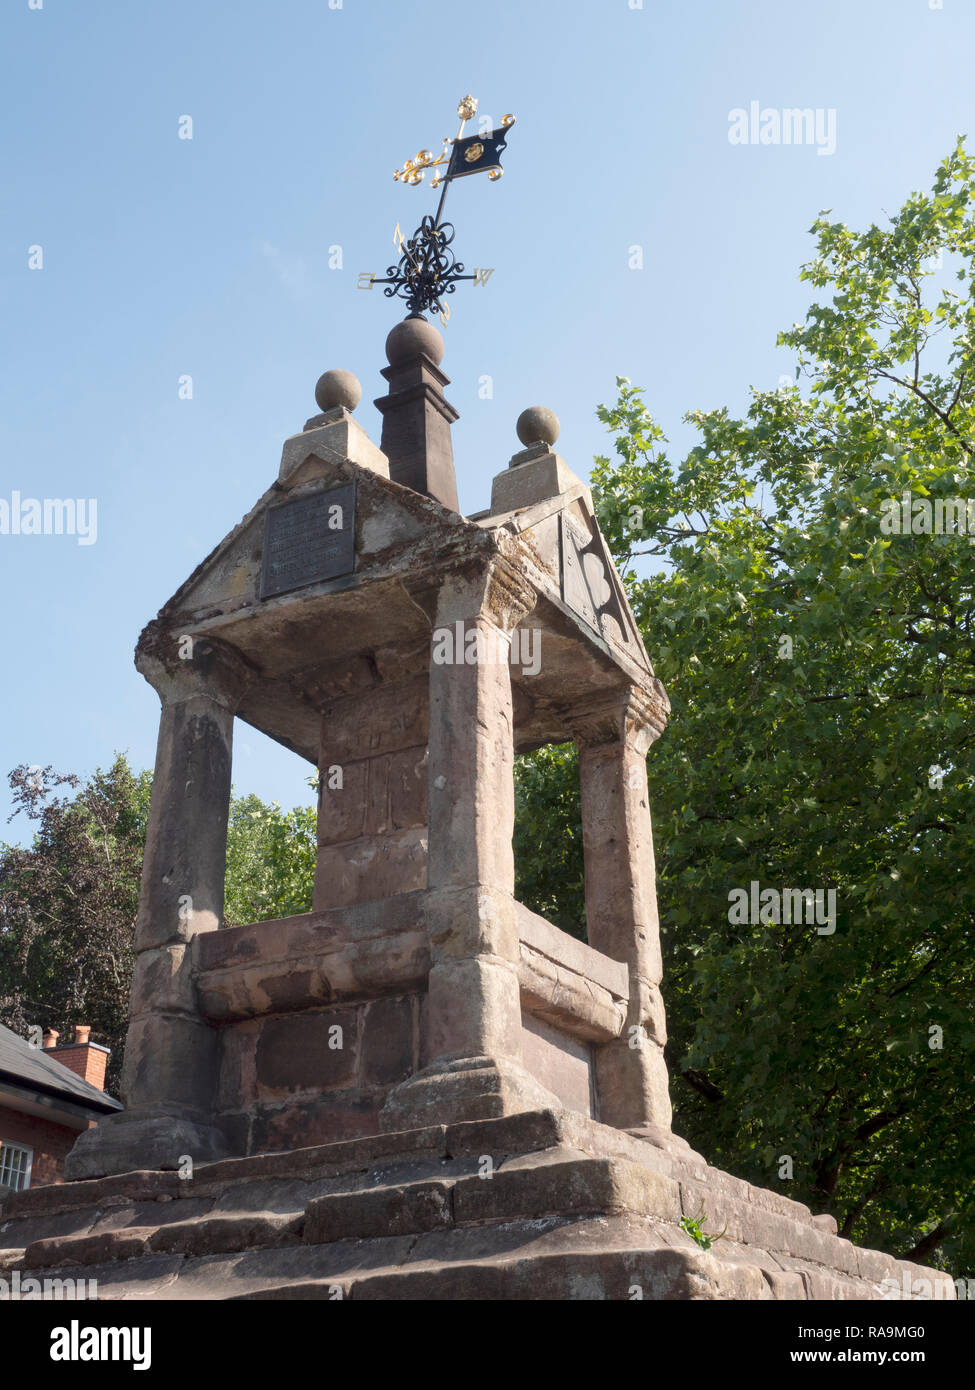 Lymm Cross at the centre of the village Lymm, Cheshire, England, UK. Stock Photo